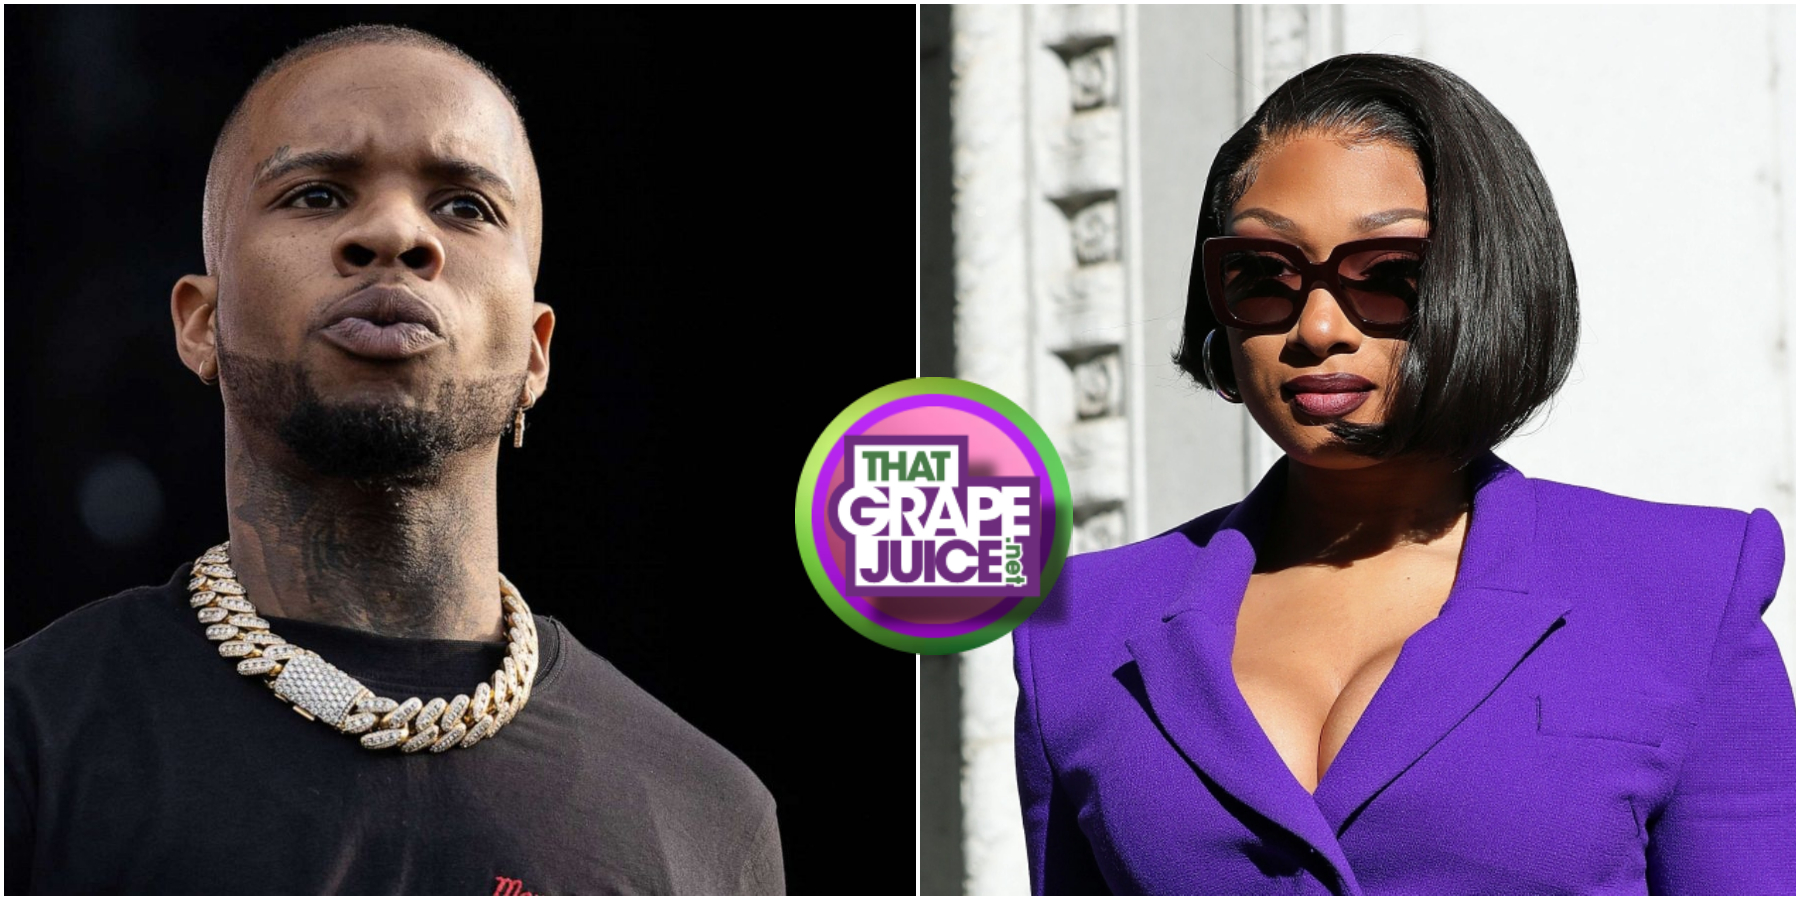 Tory Lanez’s Legal Team Vows To “Explore” Appeal Options After He Was Found Guilty of Shooting Megan Thee Stallion